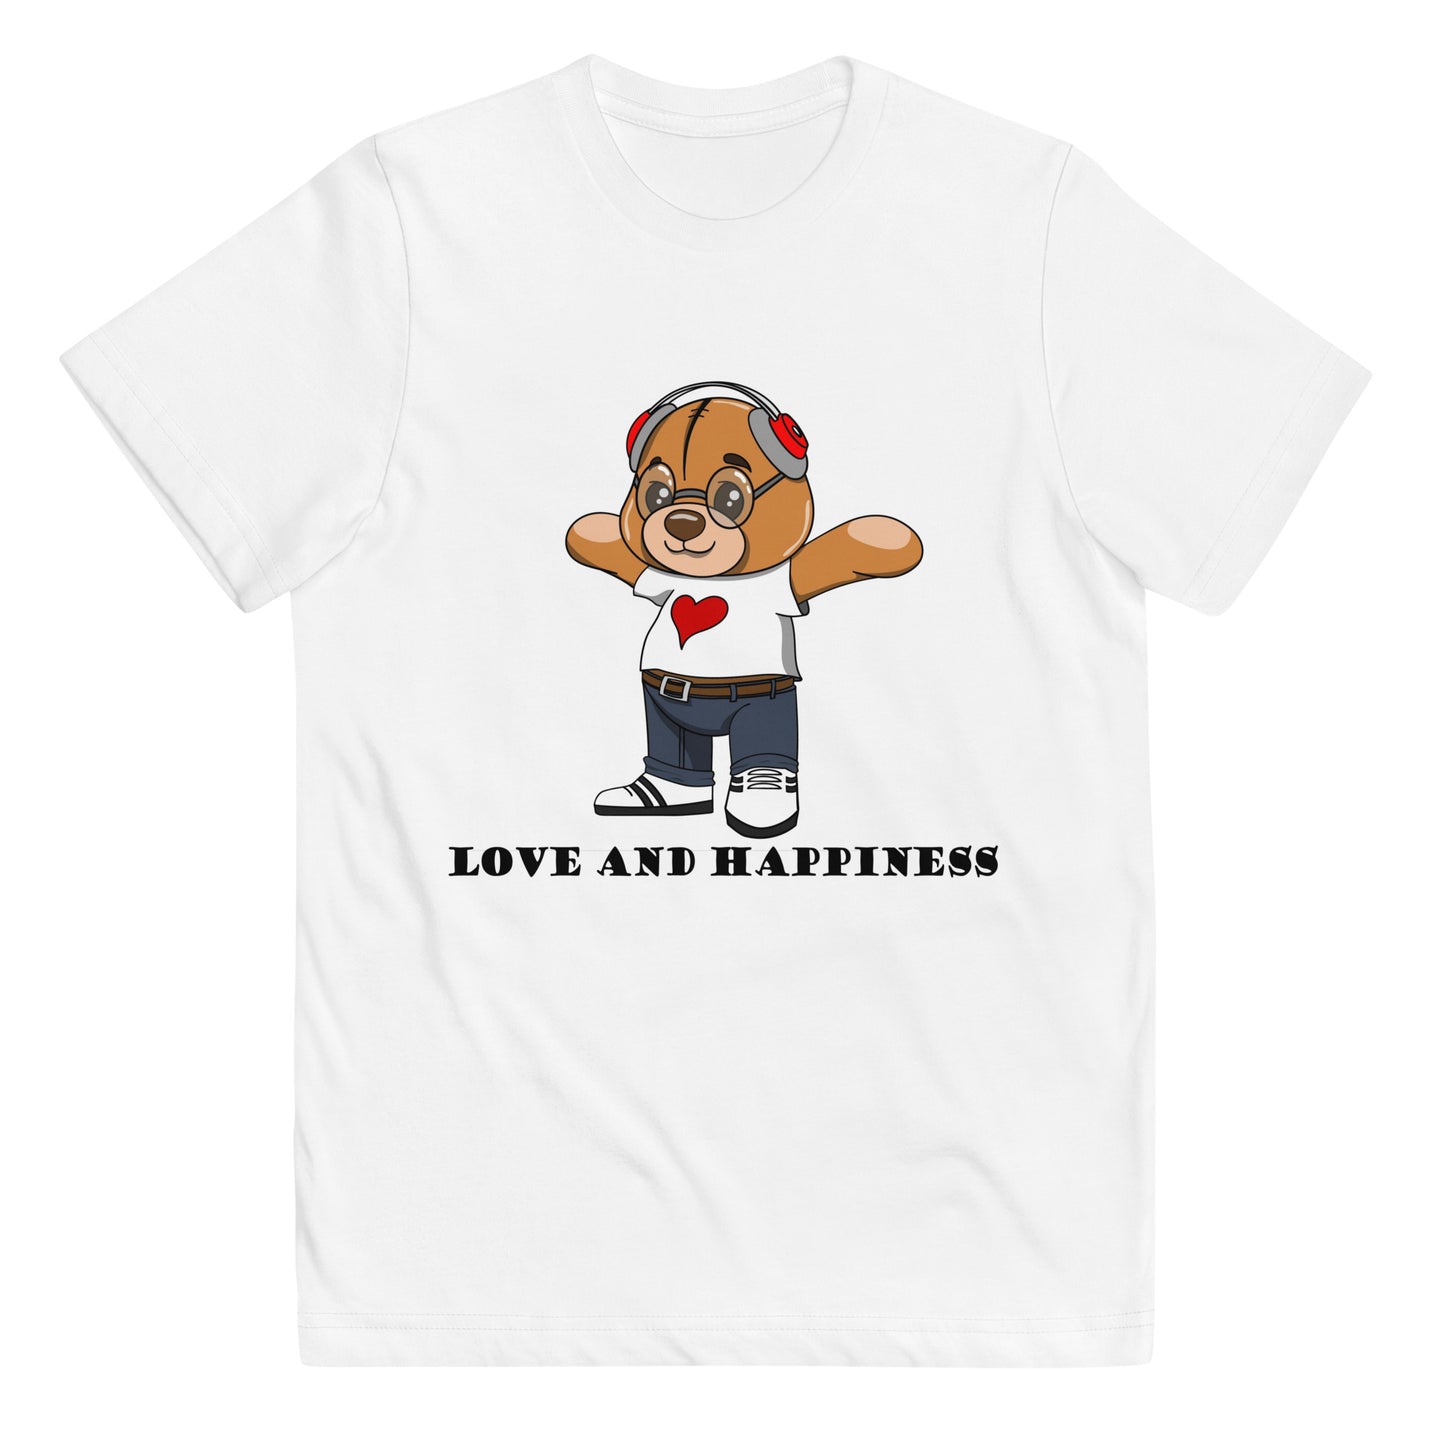 Love and Happiness youth shirt